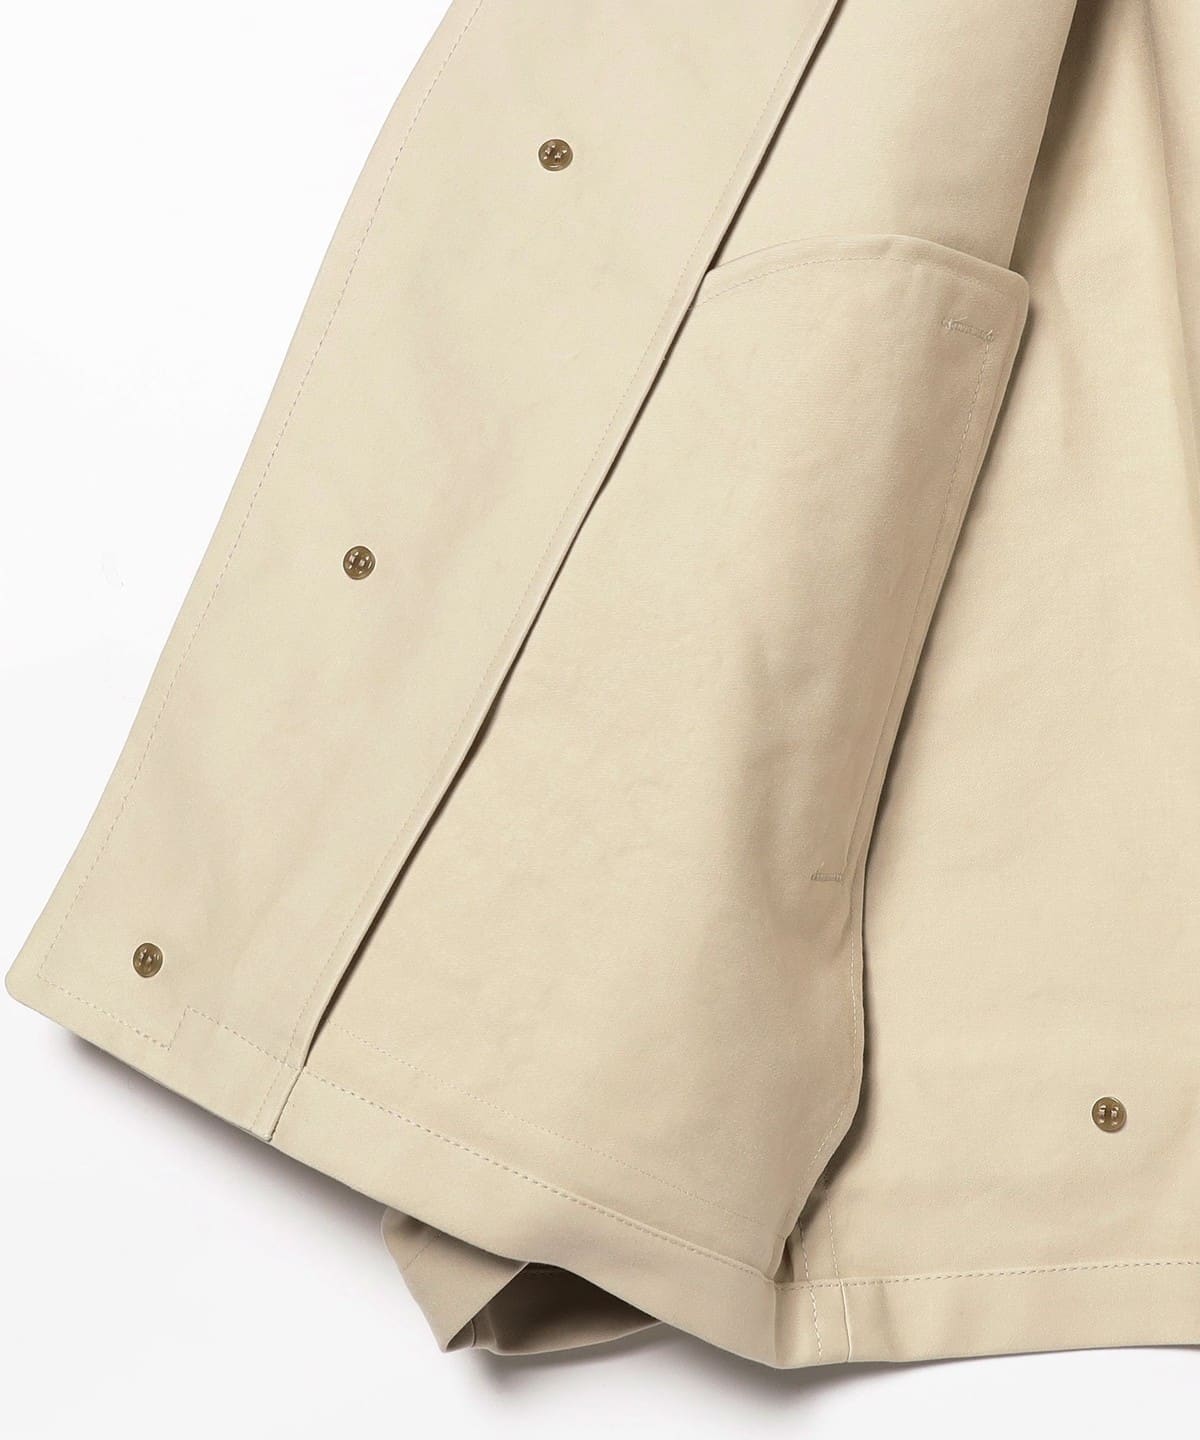 BEAMS F F CONCETTO / Type M41 military jacket (blouson military ...